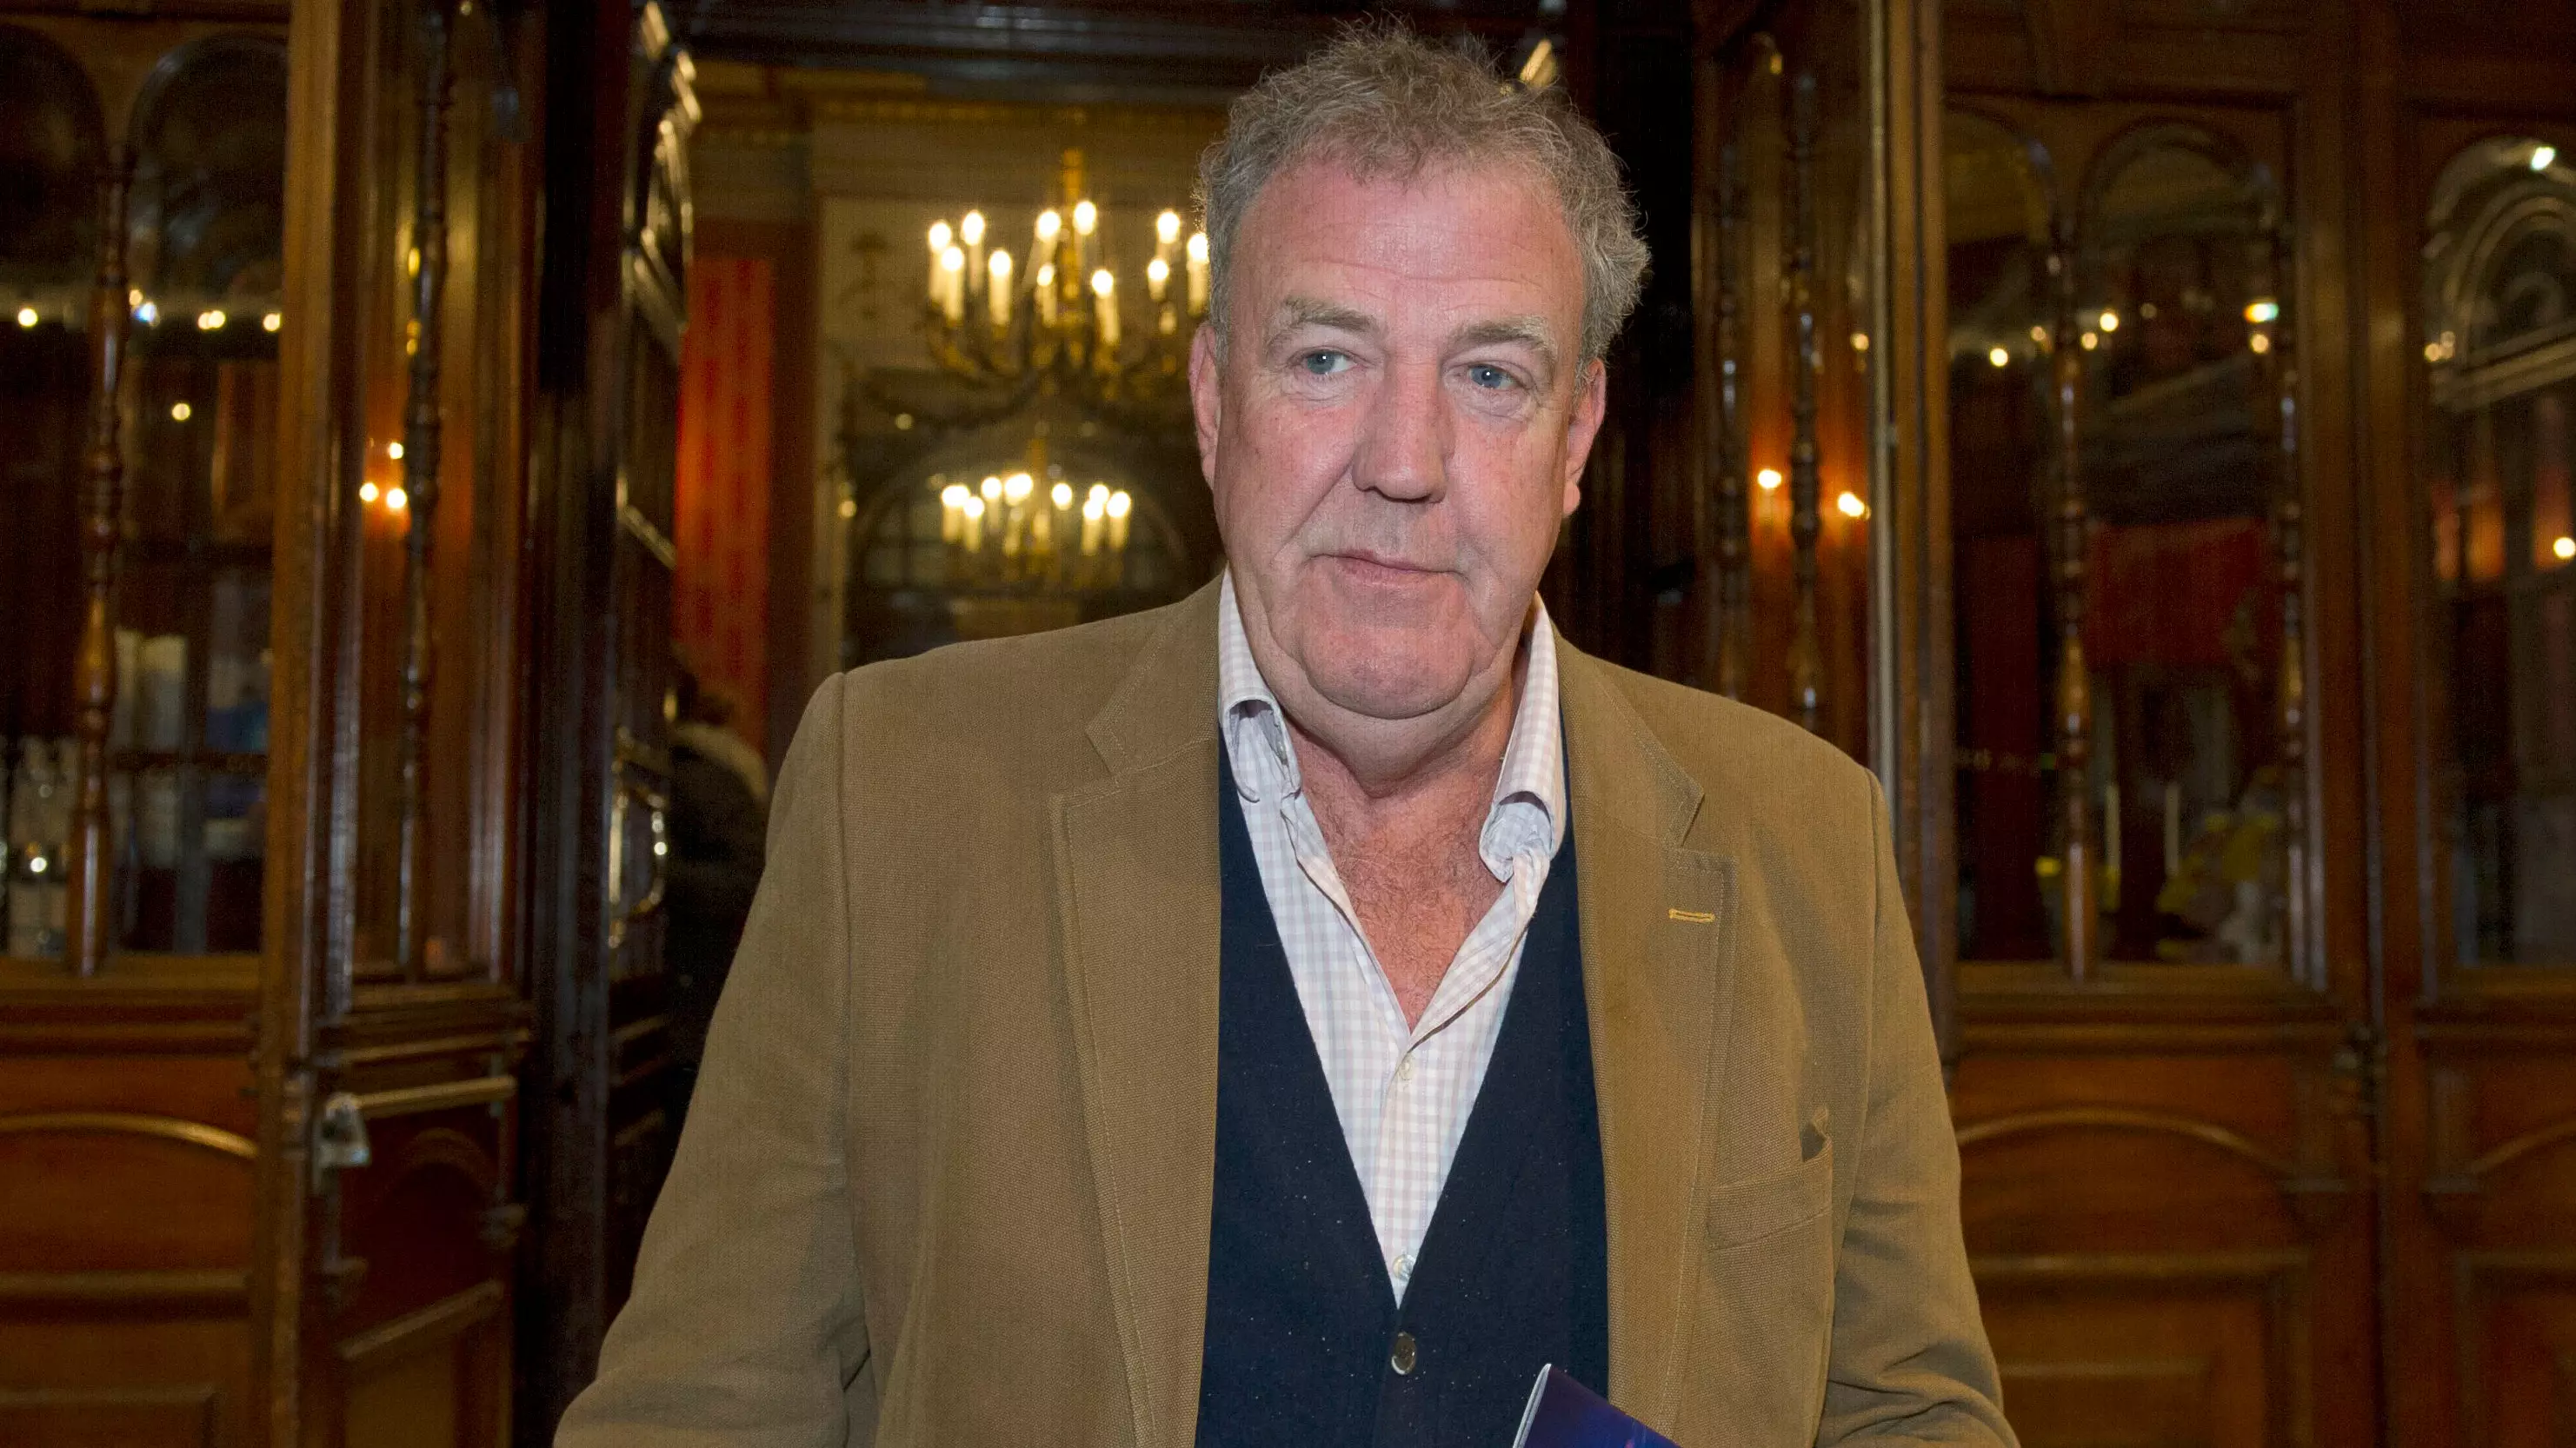 Jeremy Clarkson Feared For His Life When Held At Gun Point